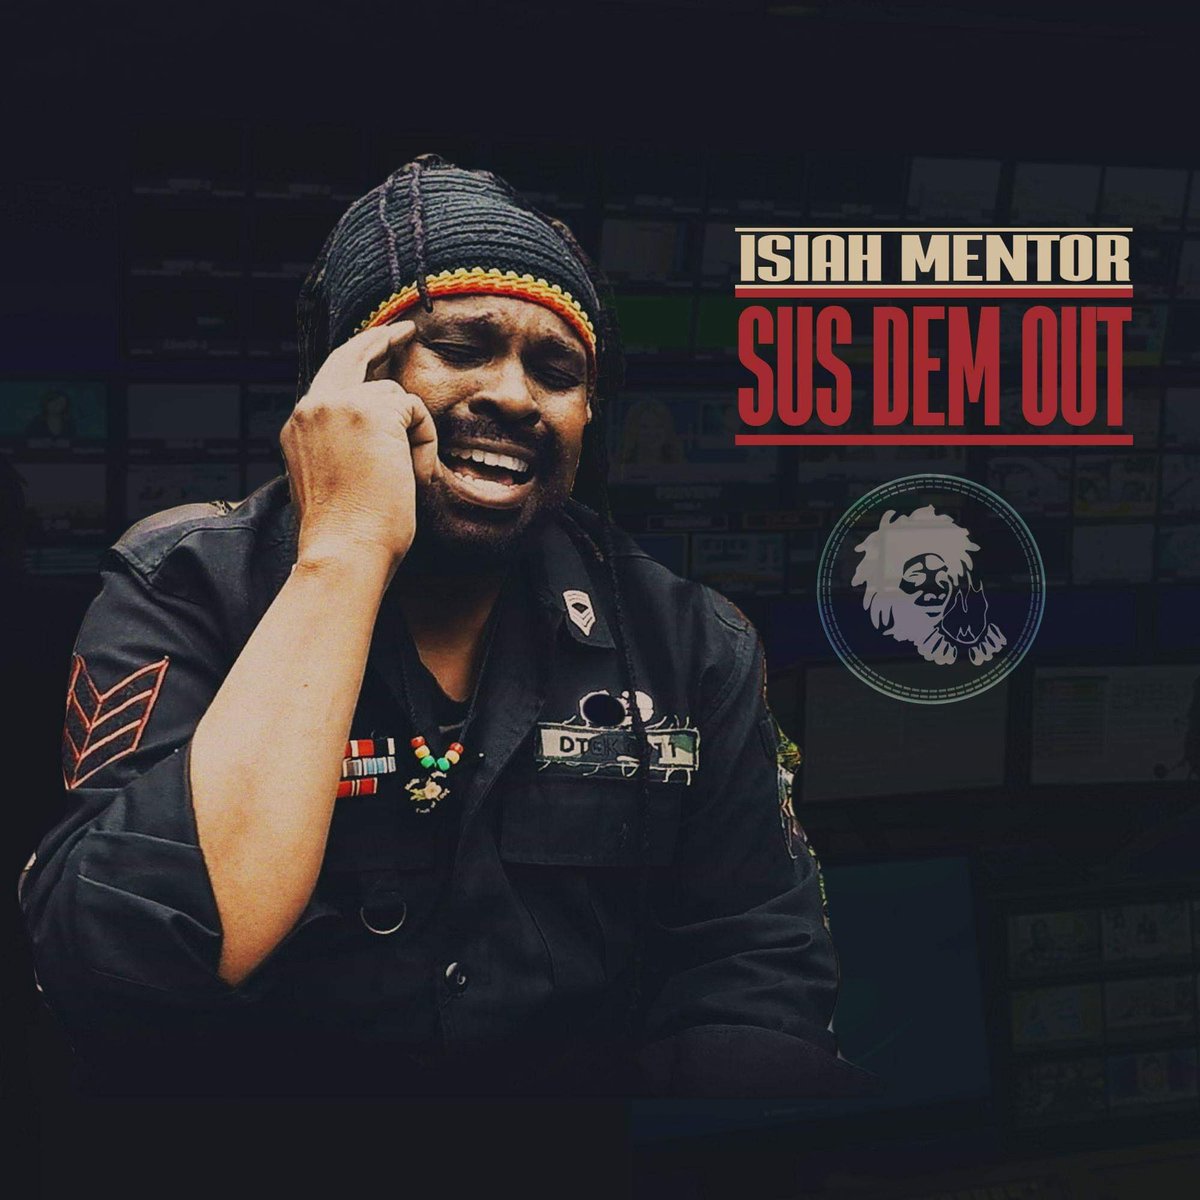 If you are on the mailing list, you should have received the latest free promo from #friendlyfiremusic yesterday  : Isiah Mentor - Sus Dem Out - check your spam if you havent! Out 8thjune
#reggae #ukreggae @Robin_FF @IsiahMentor #digitalreggae #roots #808bass #jamaica #herbalist